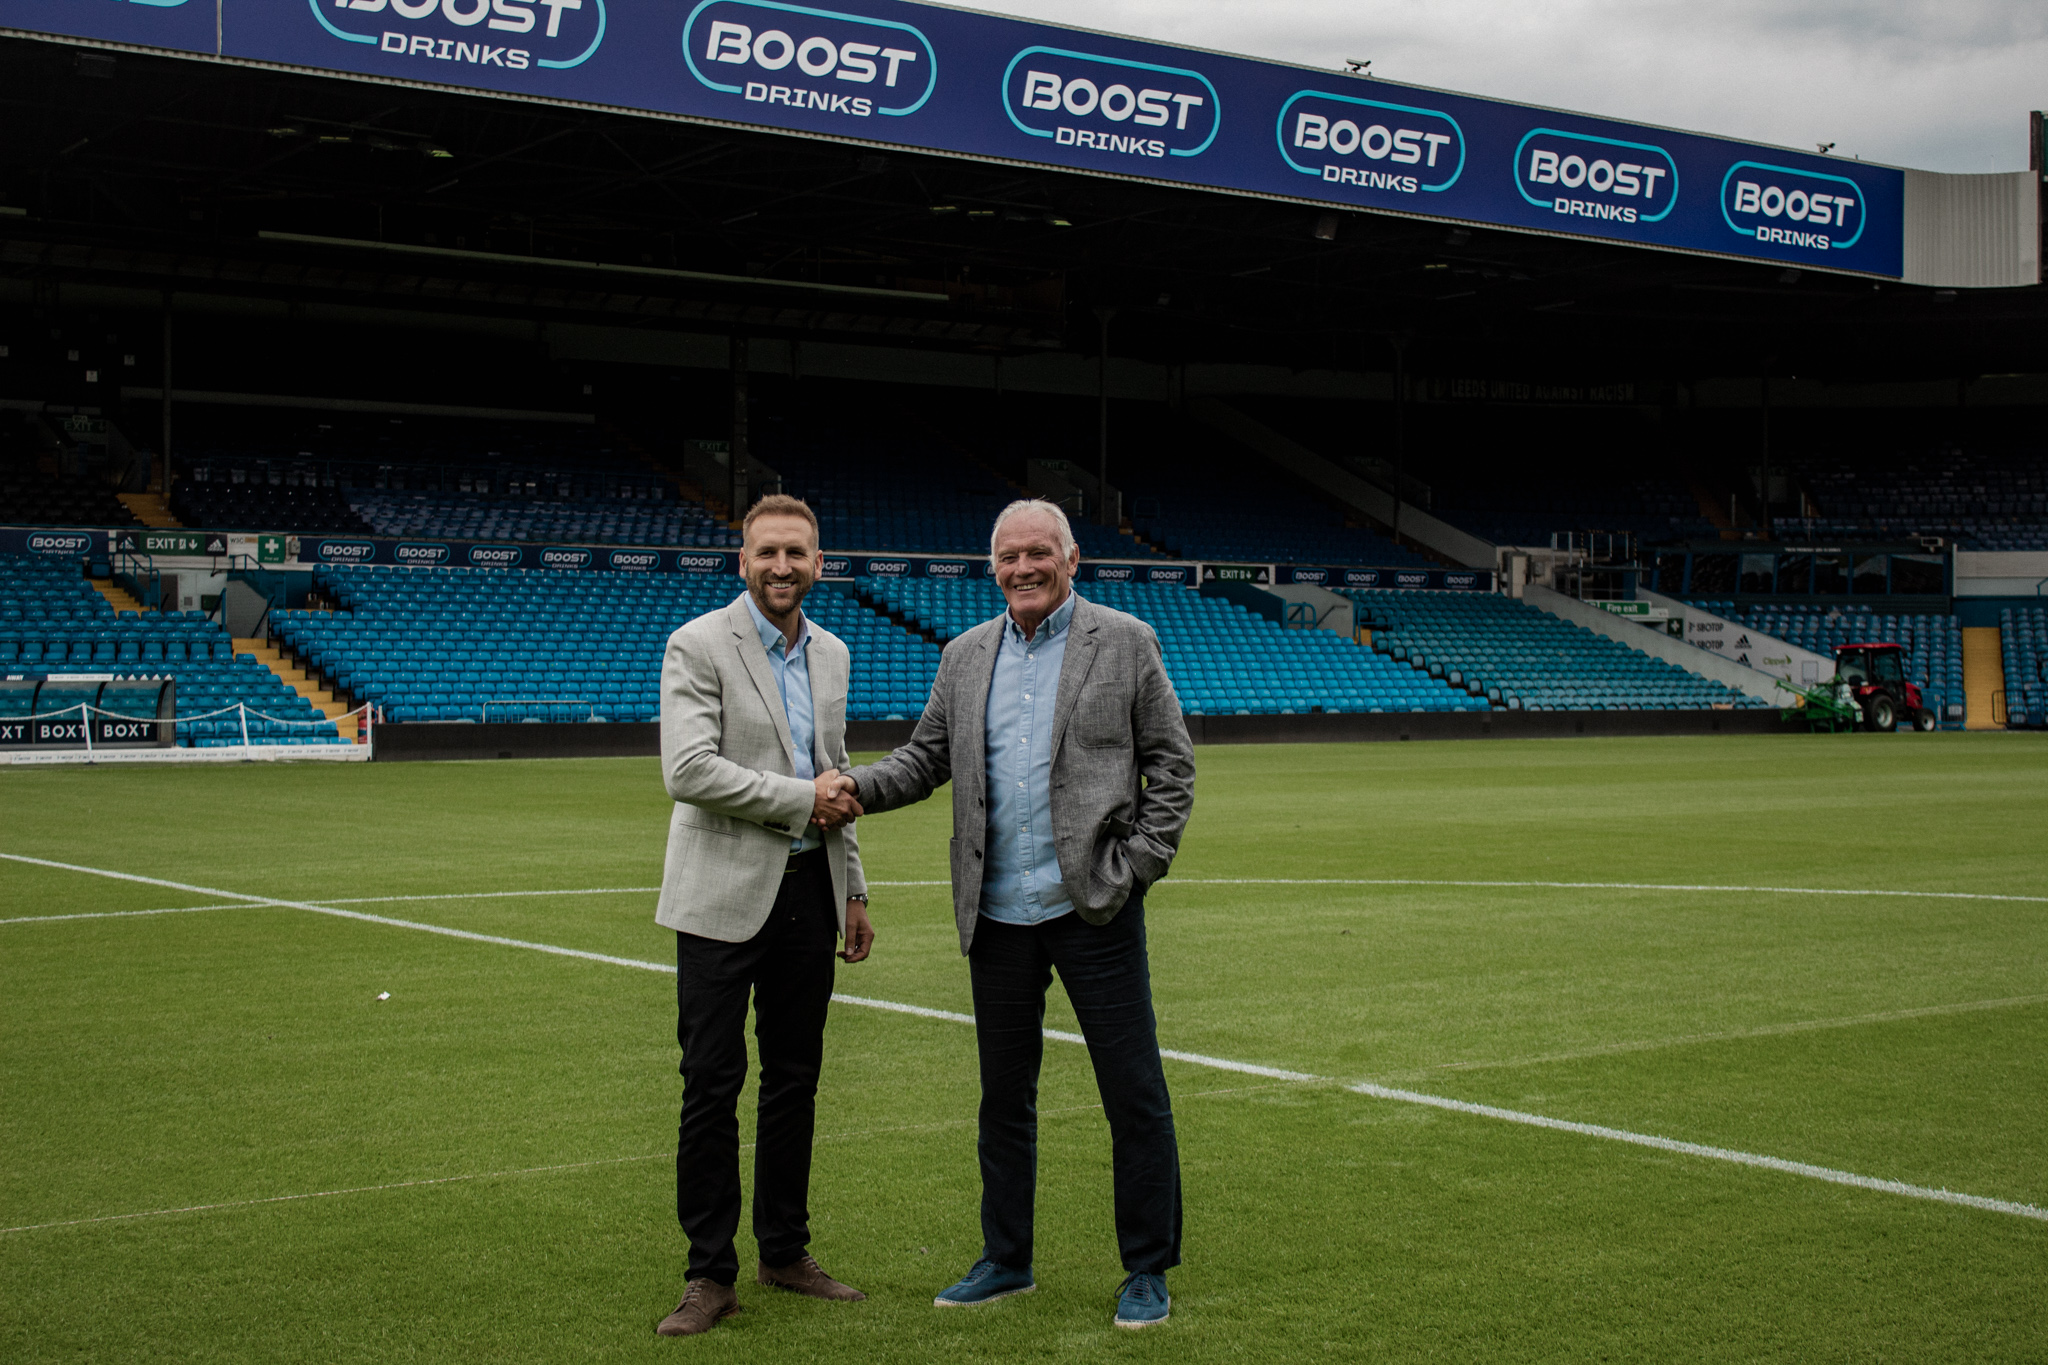 Boost Drinks and Leeds United FC expand partnership